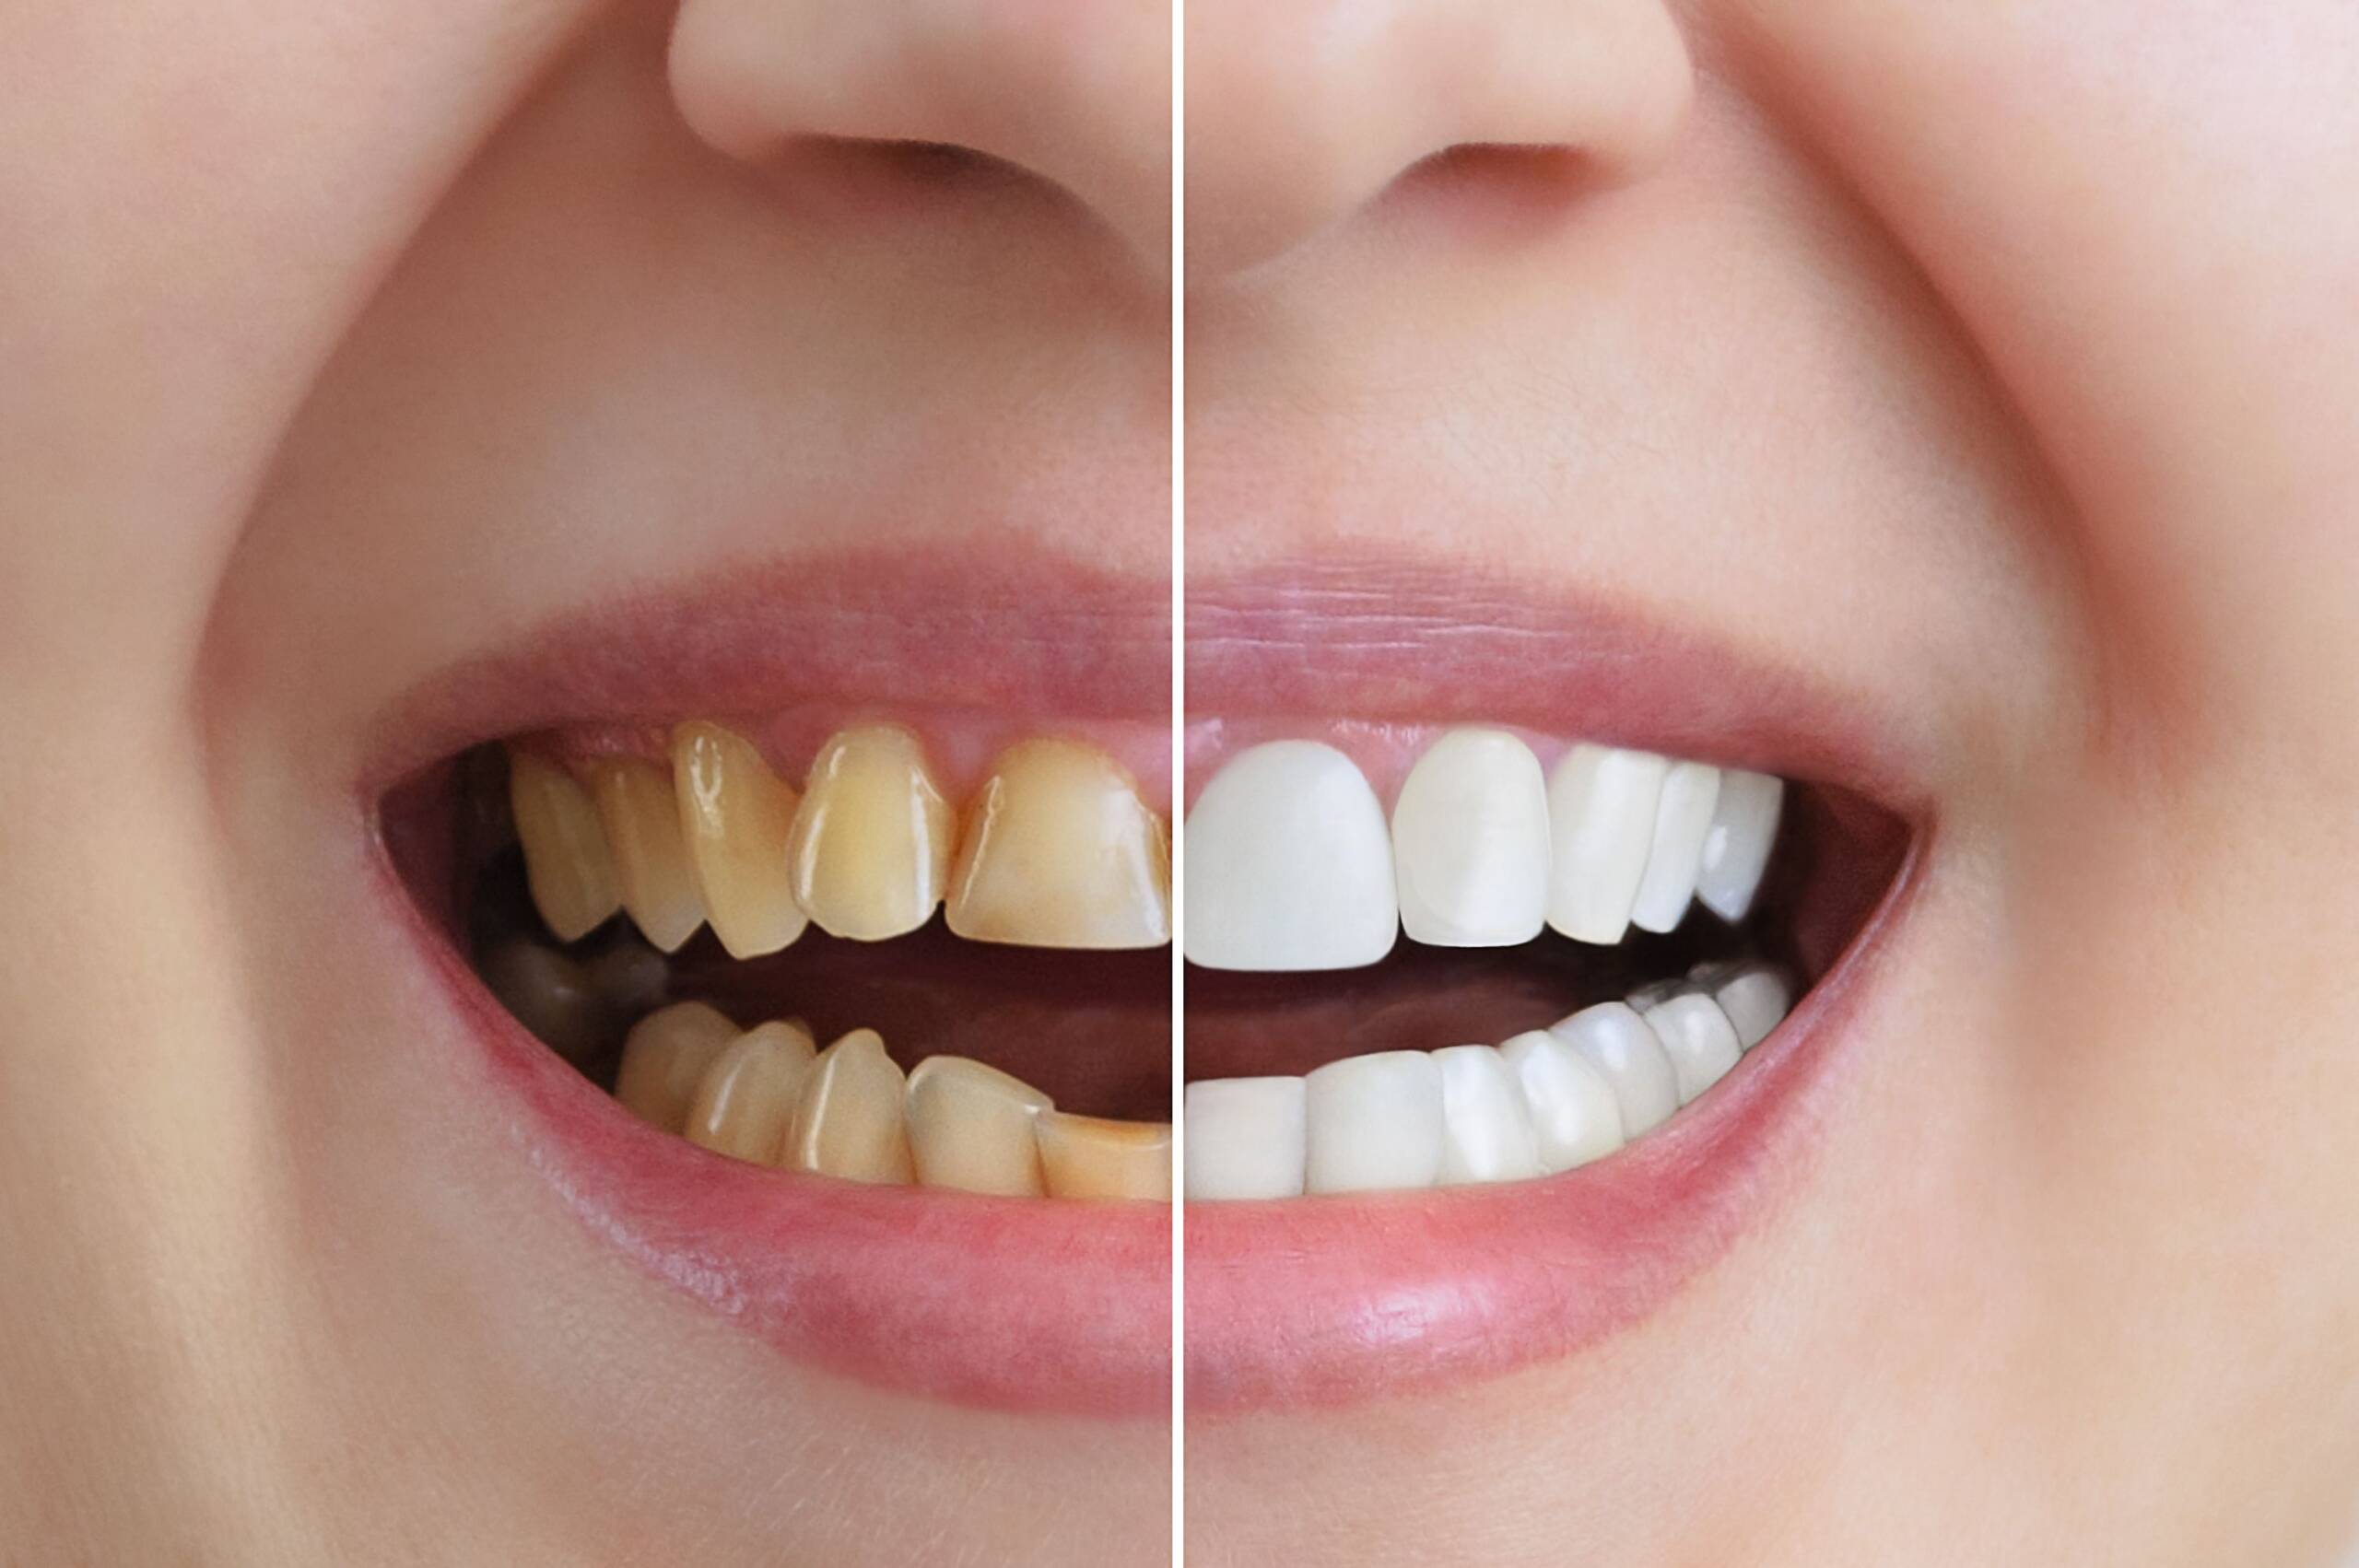 Dental Crowns in South Yarra Family Dental Care